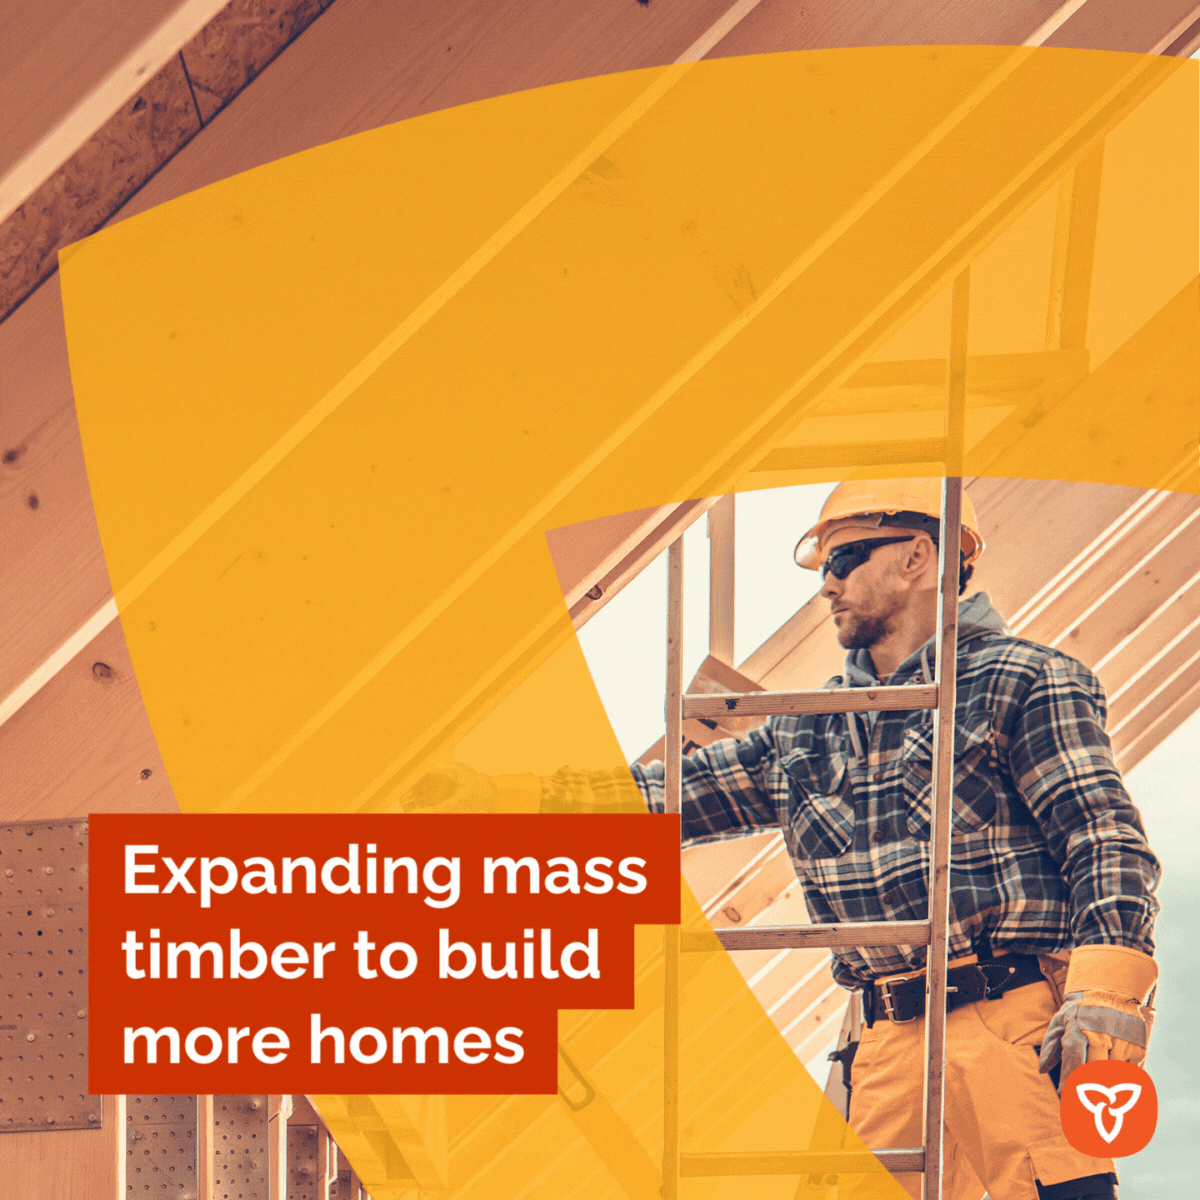 Today, Minister @PaulCalandra announced that Ontario is expanding the use of advanced wood construction, like mass timber, to make it faster and more affordable to get more #homes built while creating jobs. Learn more: news.ontario.ca/en/release/100… #ONpoli